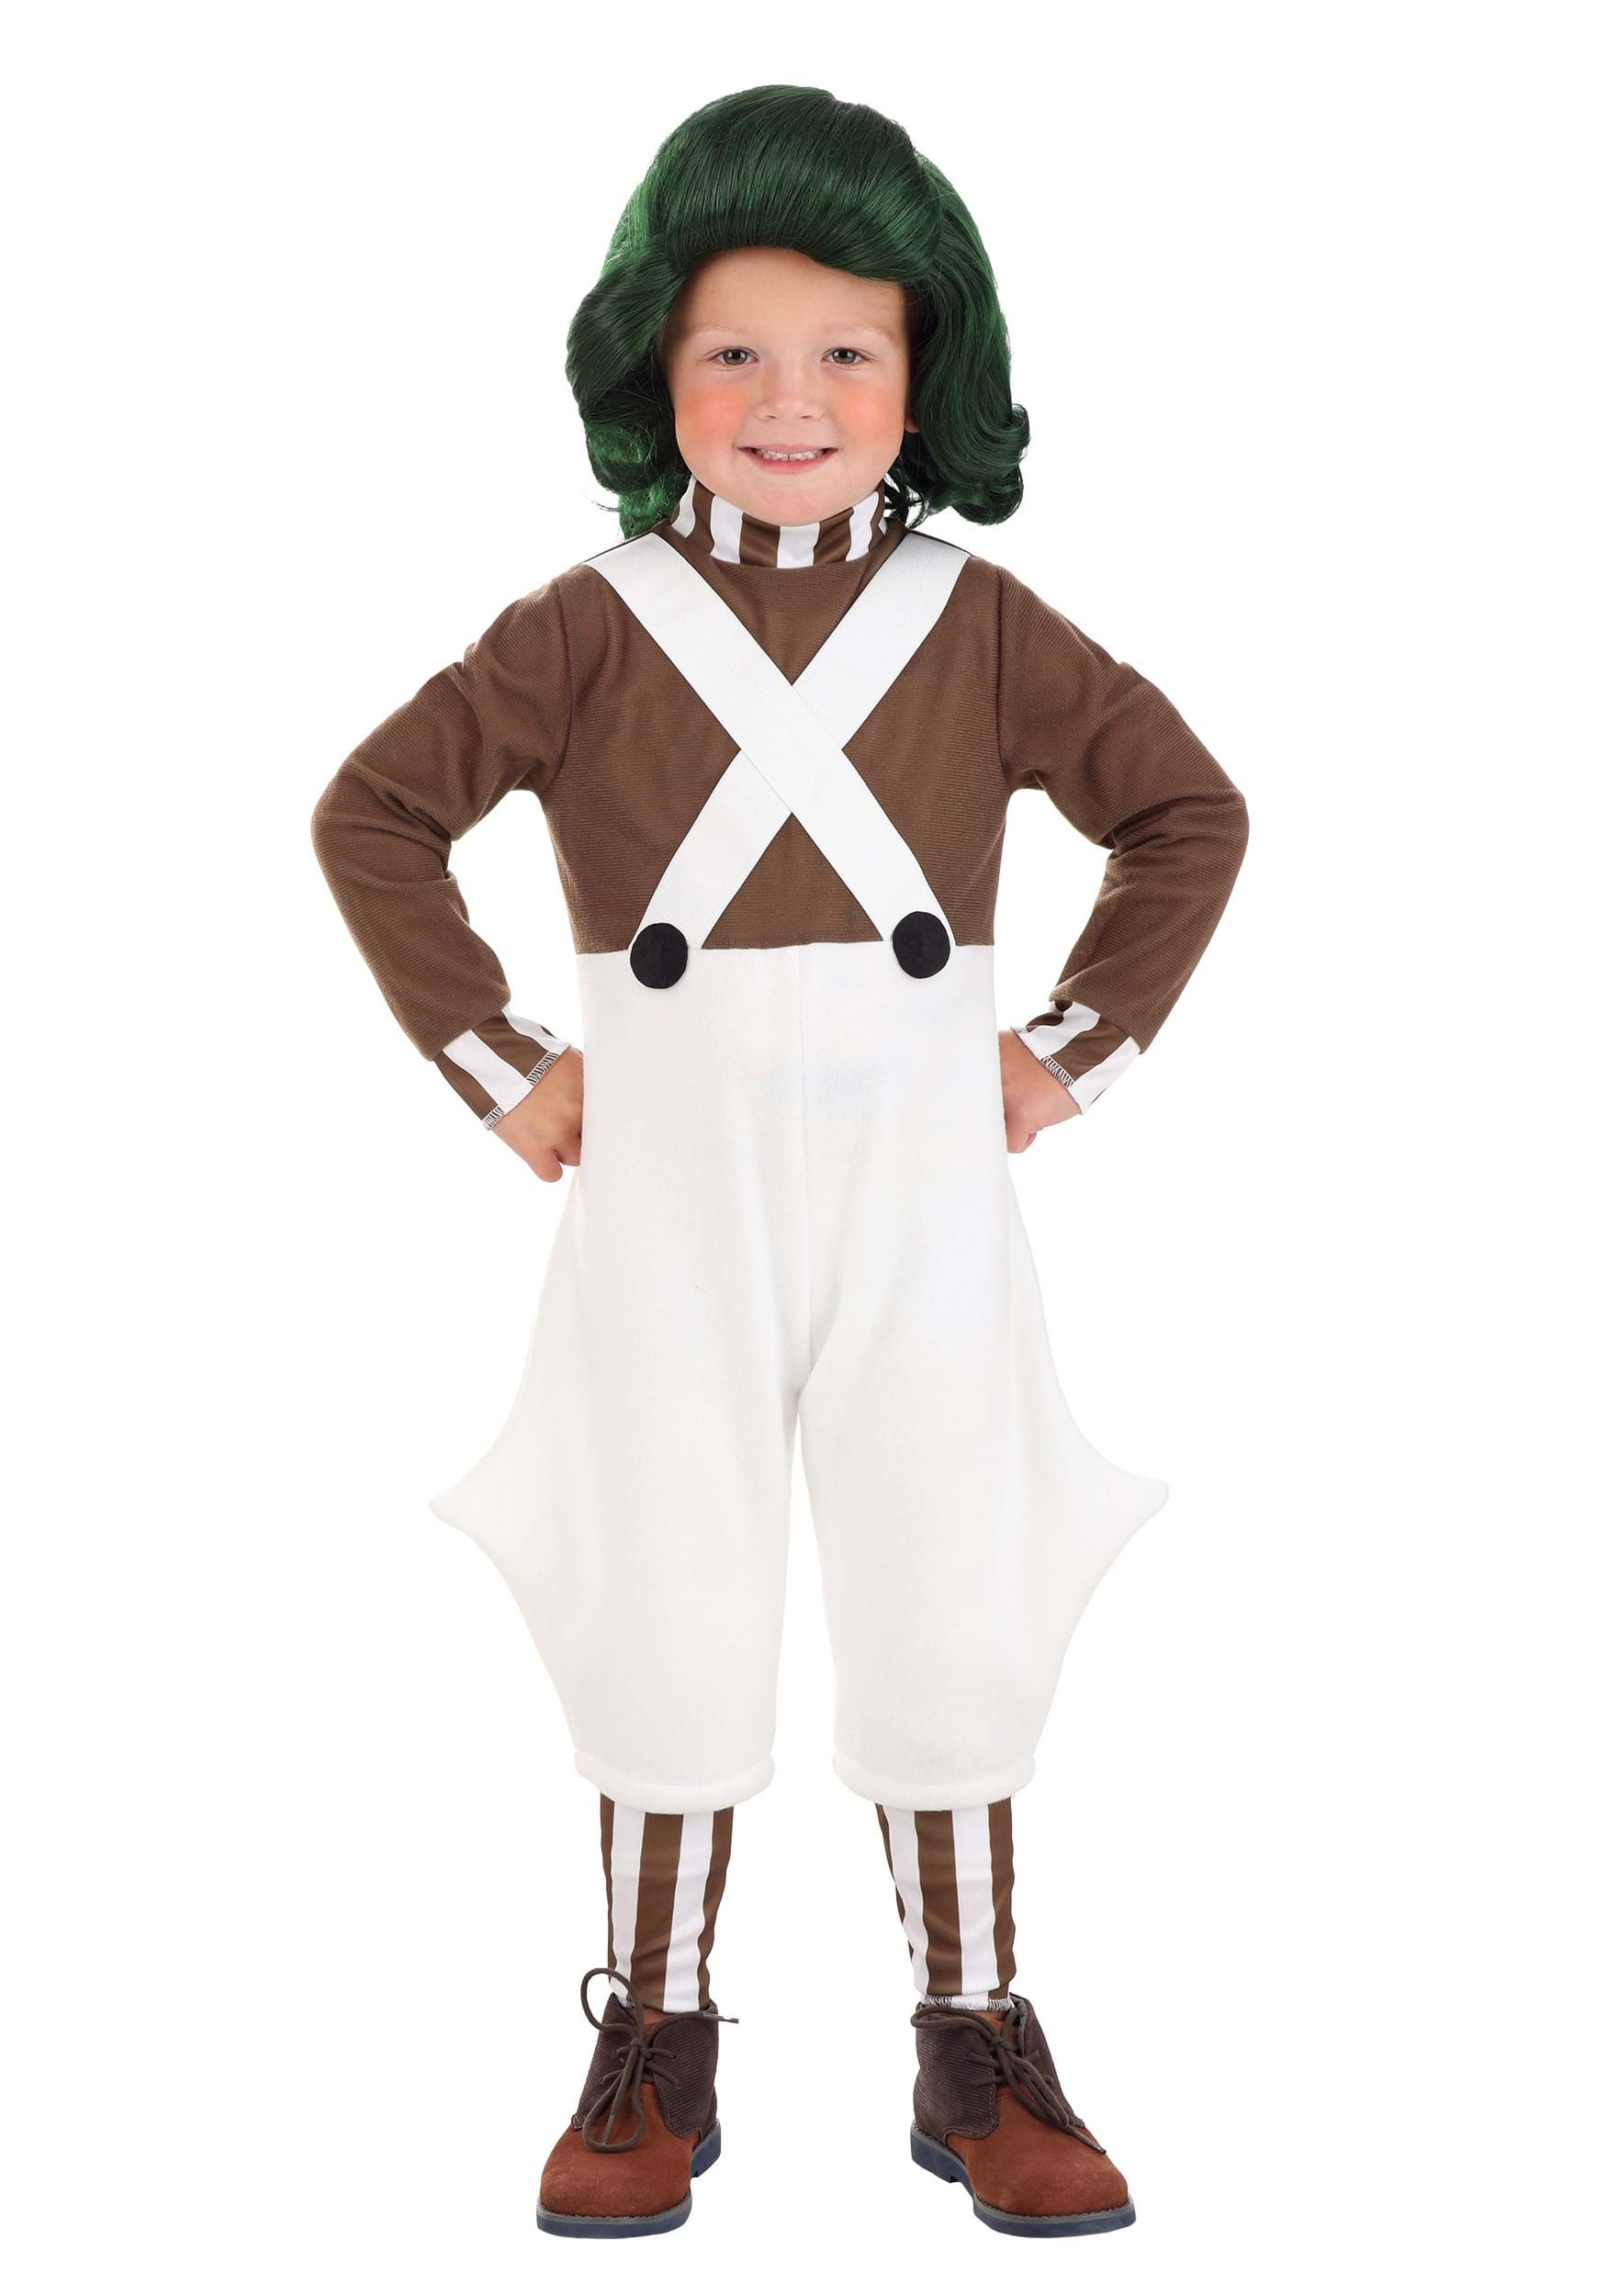 Photos - Fancy Dress Toddler Jerry Leigh  Willy Wonka Oompa Loompa Costume Brown/White JLJLF 